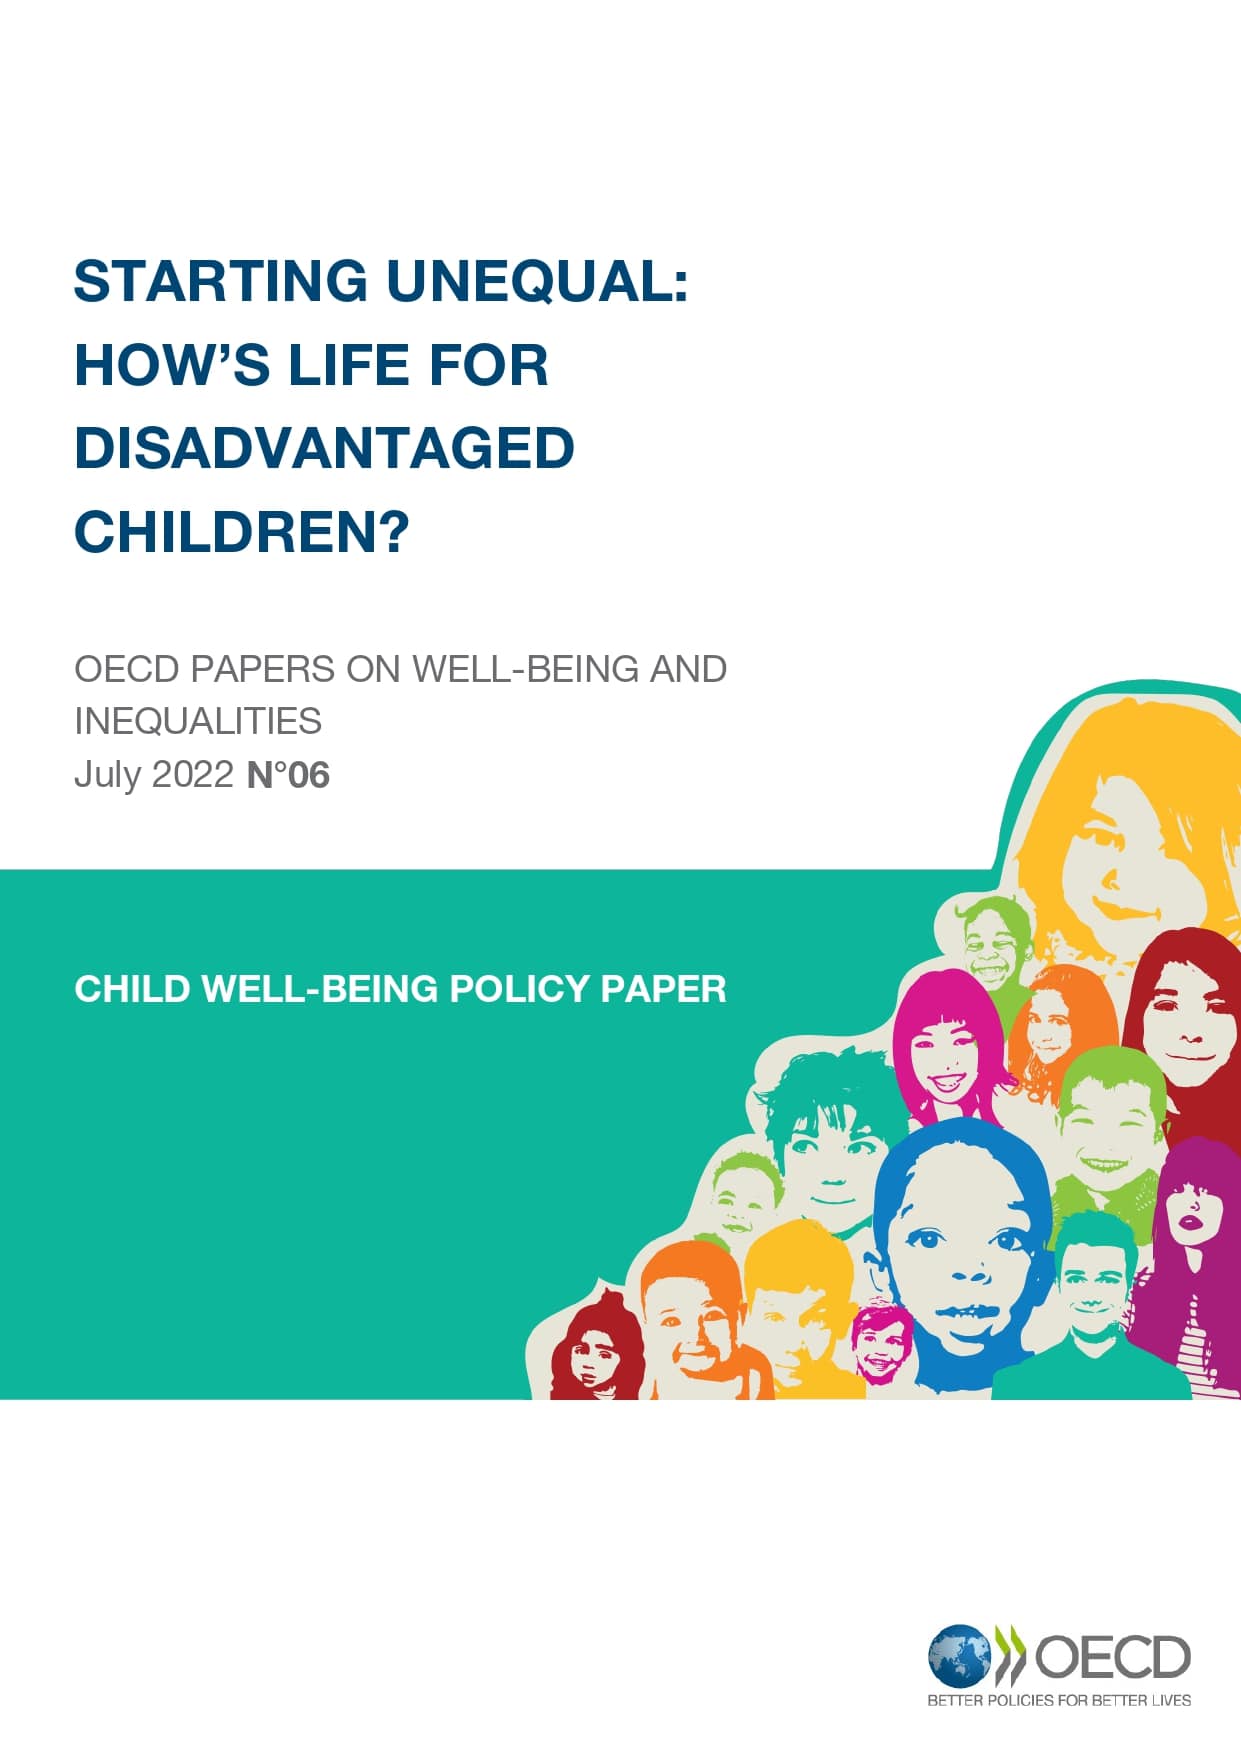 Starting unequal - OECD report cover